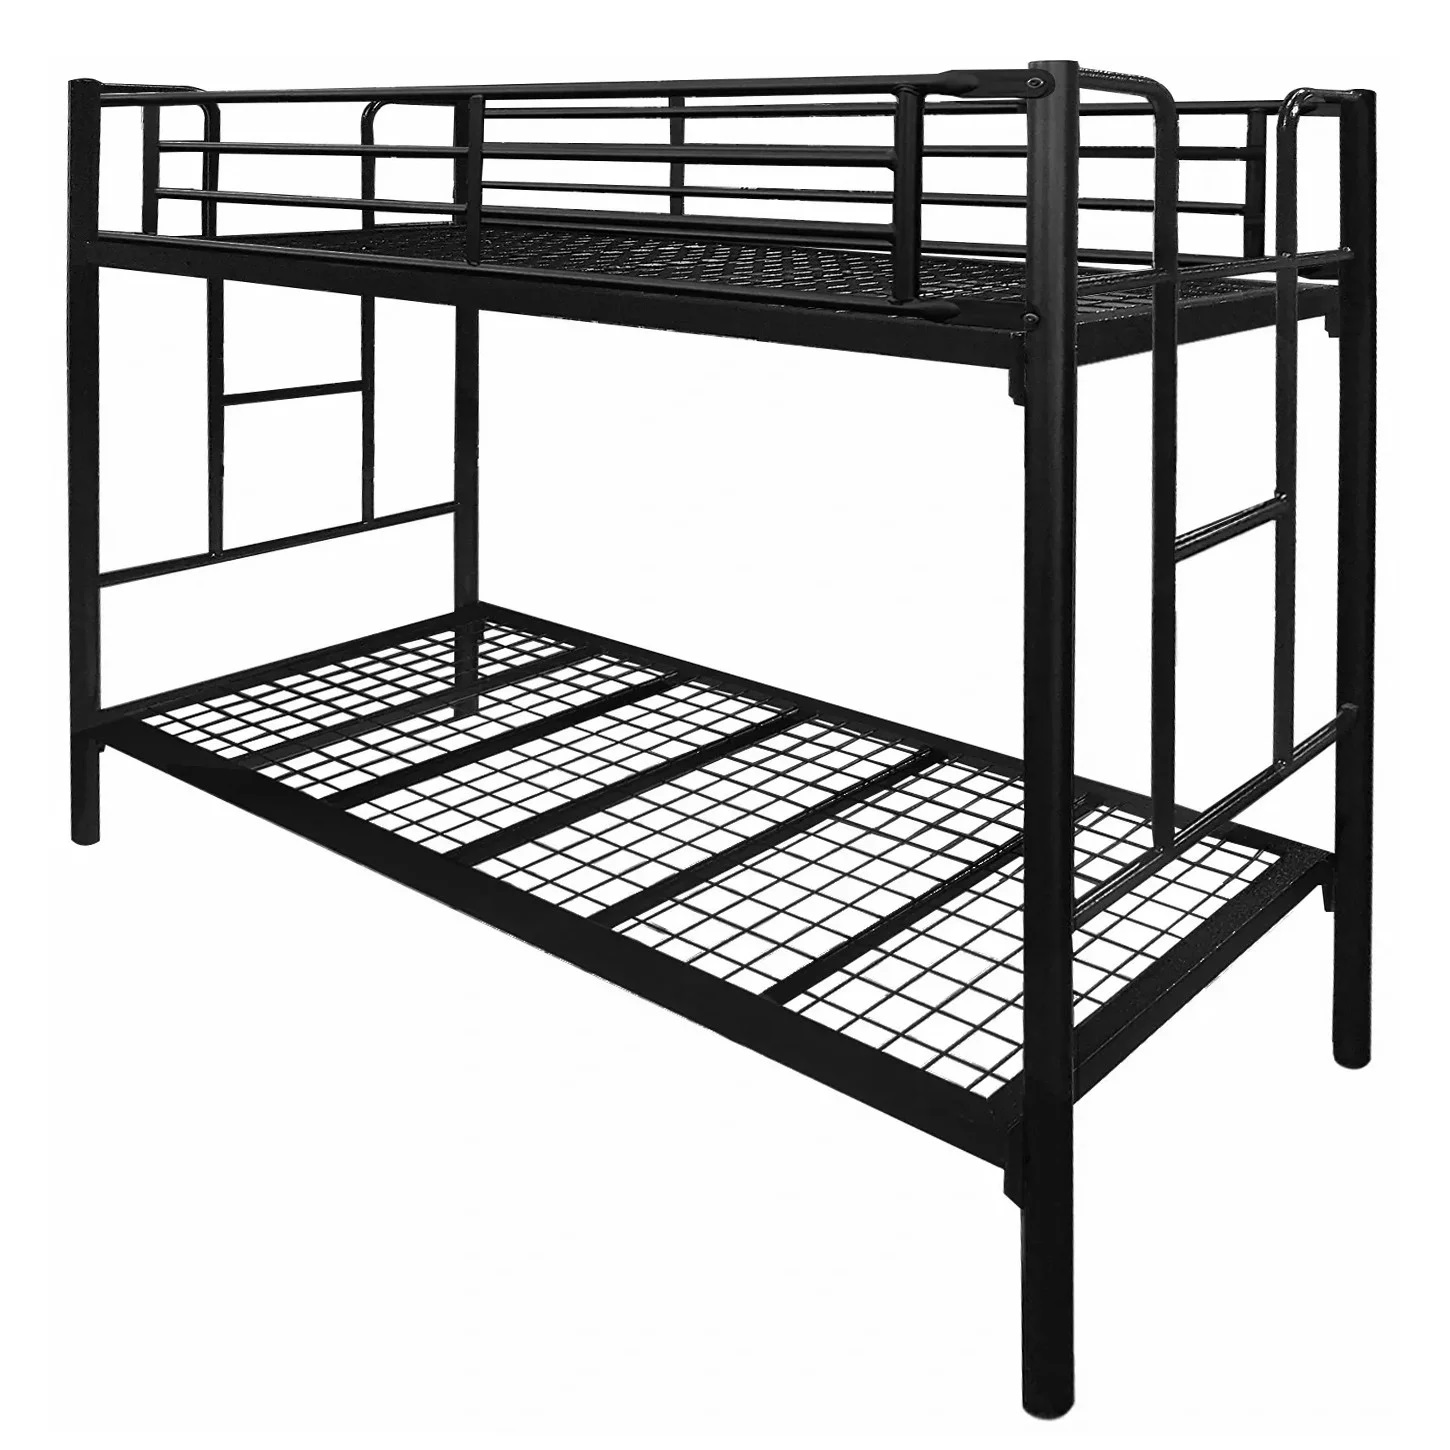 Junee Commercial Bunk Bed King Single